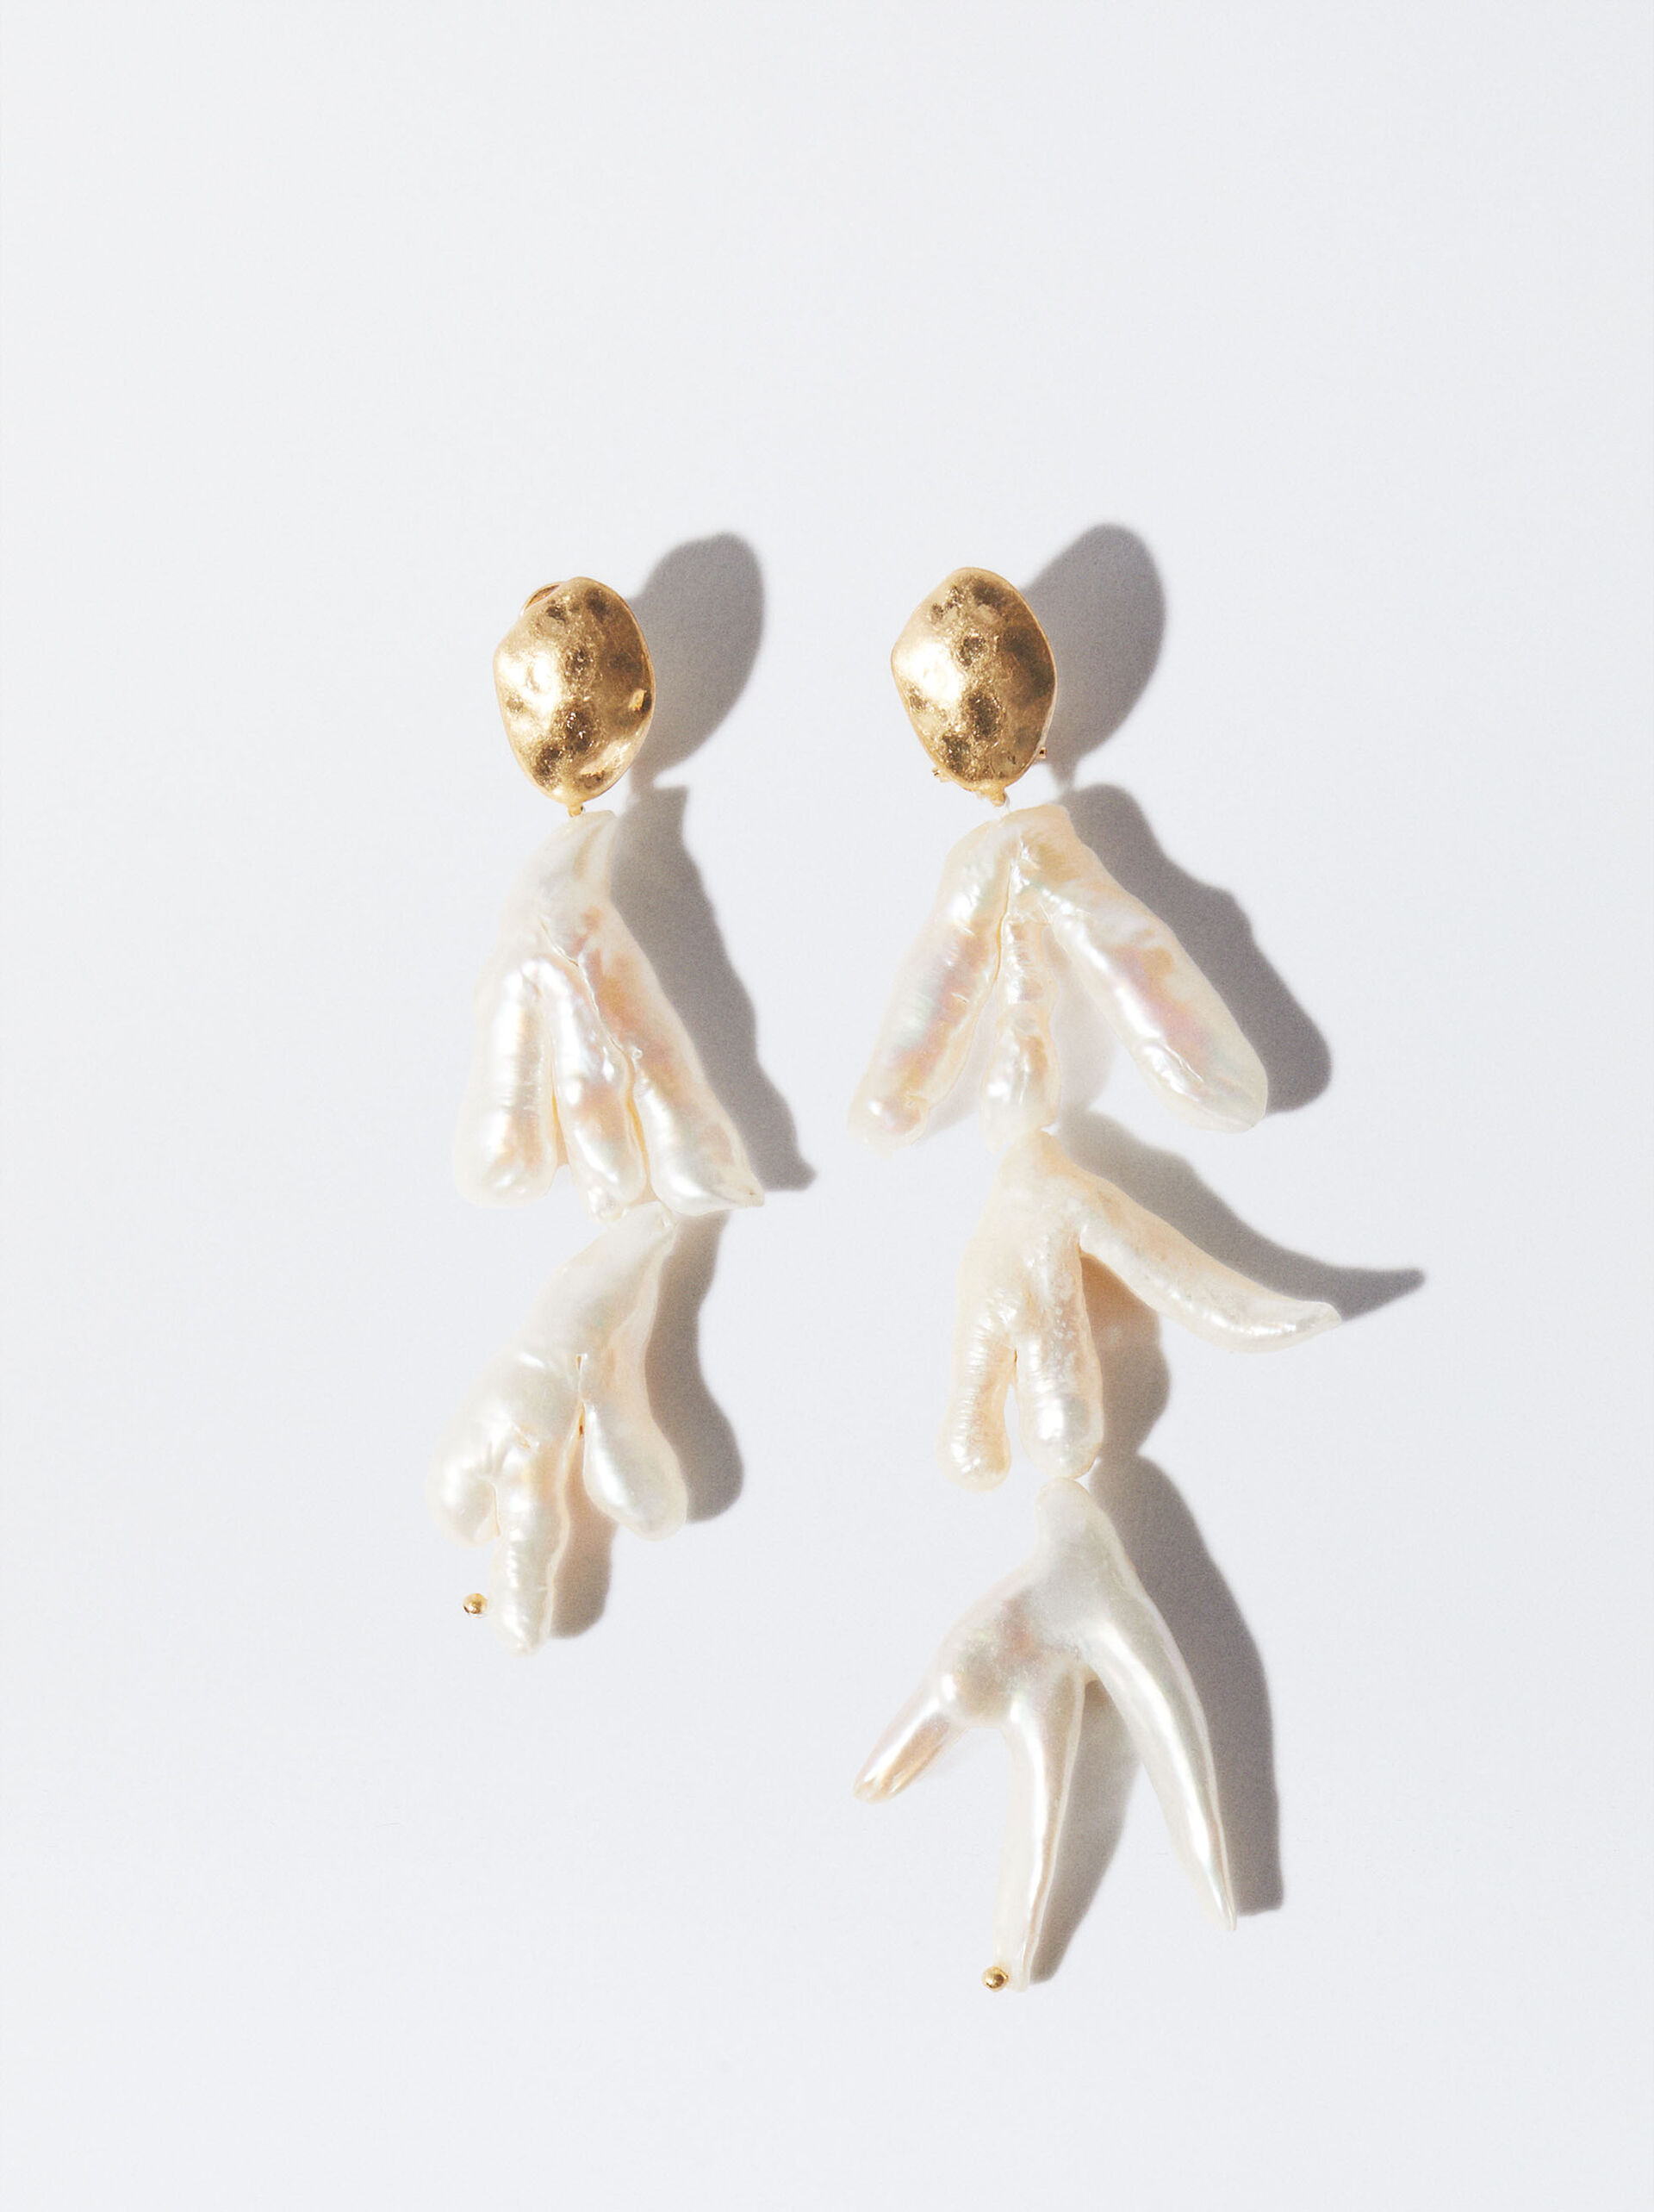 Earrings With Freshwater Pearl image number 1.0